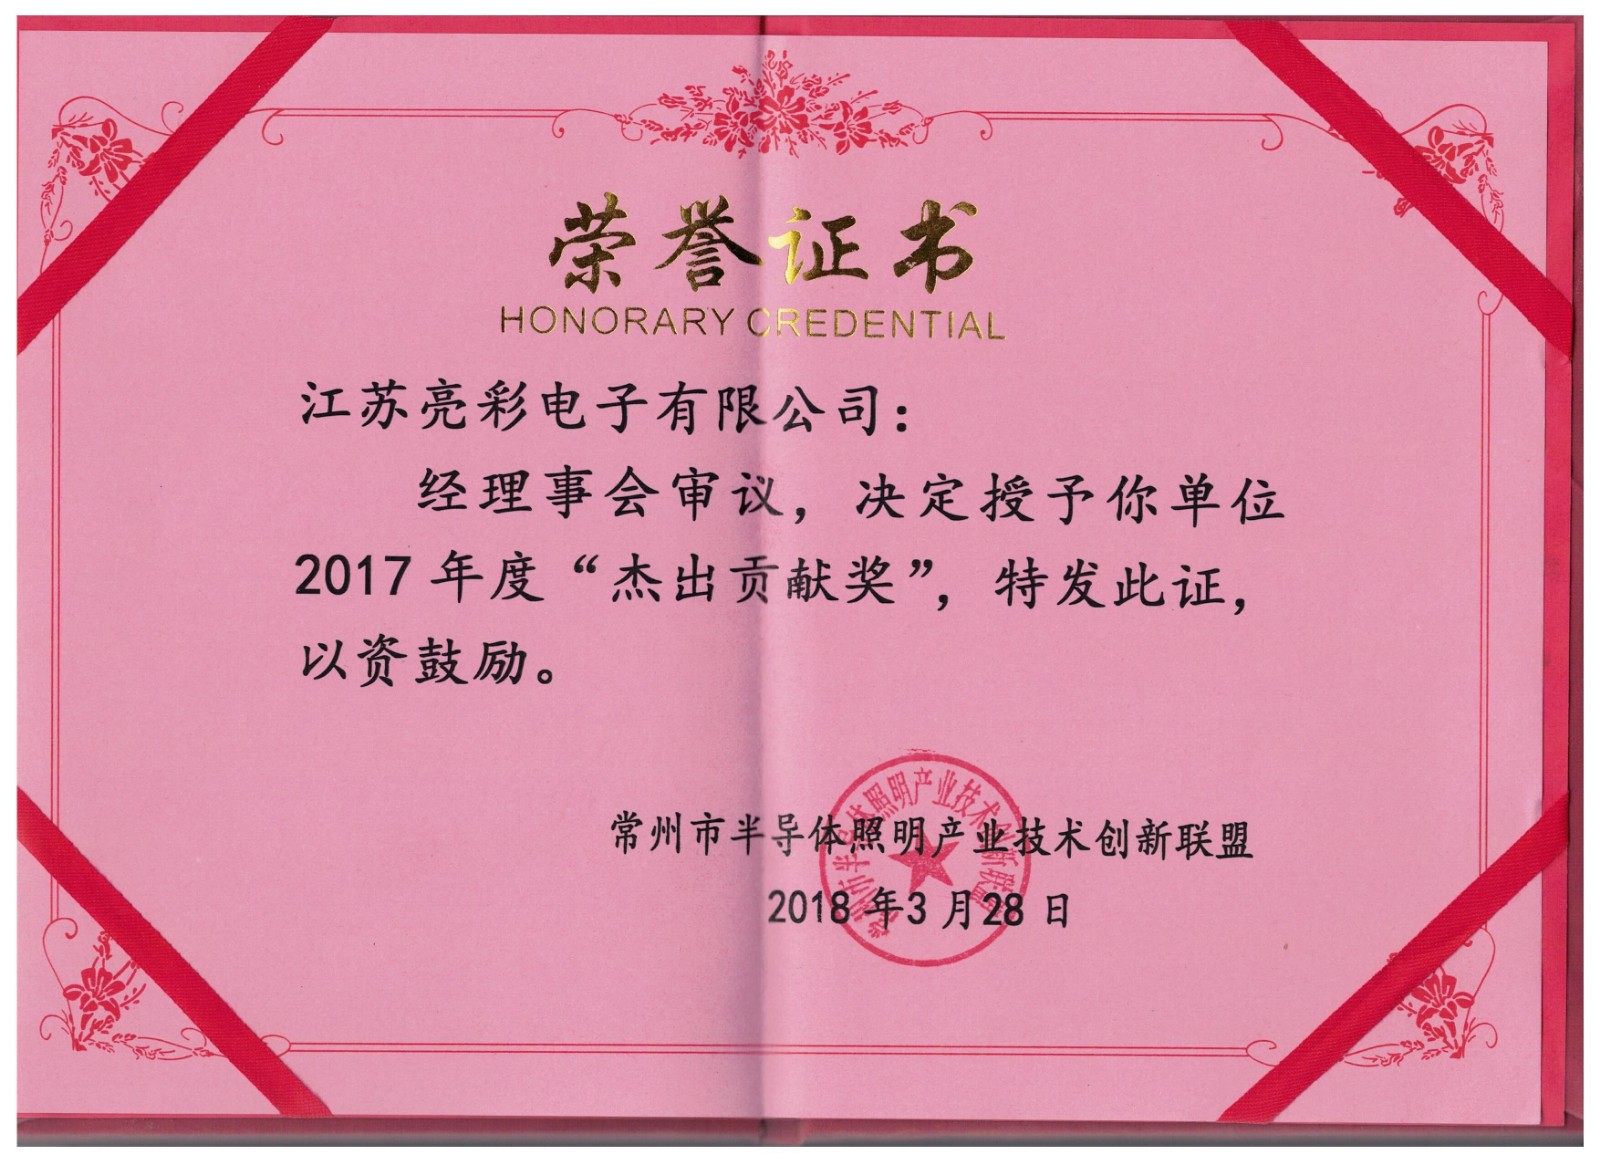 2017 Changzhou Semiconductor Lighting Industry Technology Innovation Alliance Outstanding Contribution Award